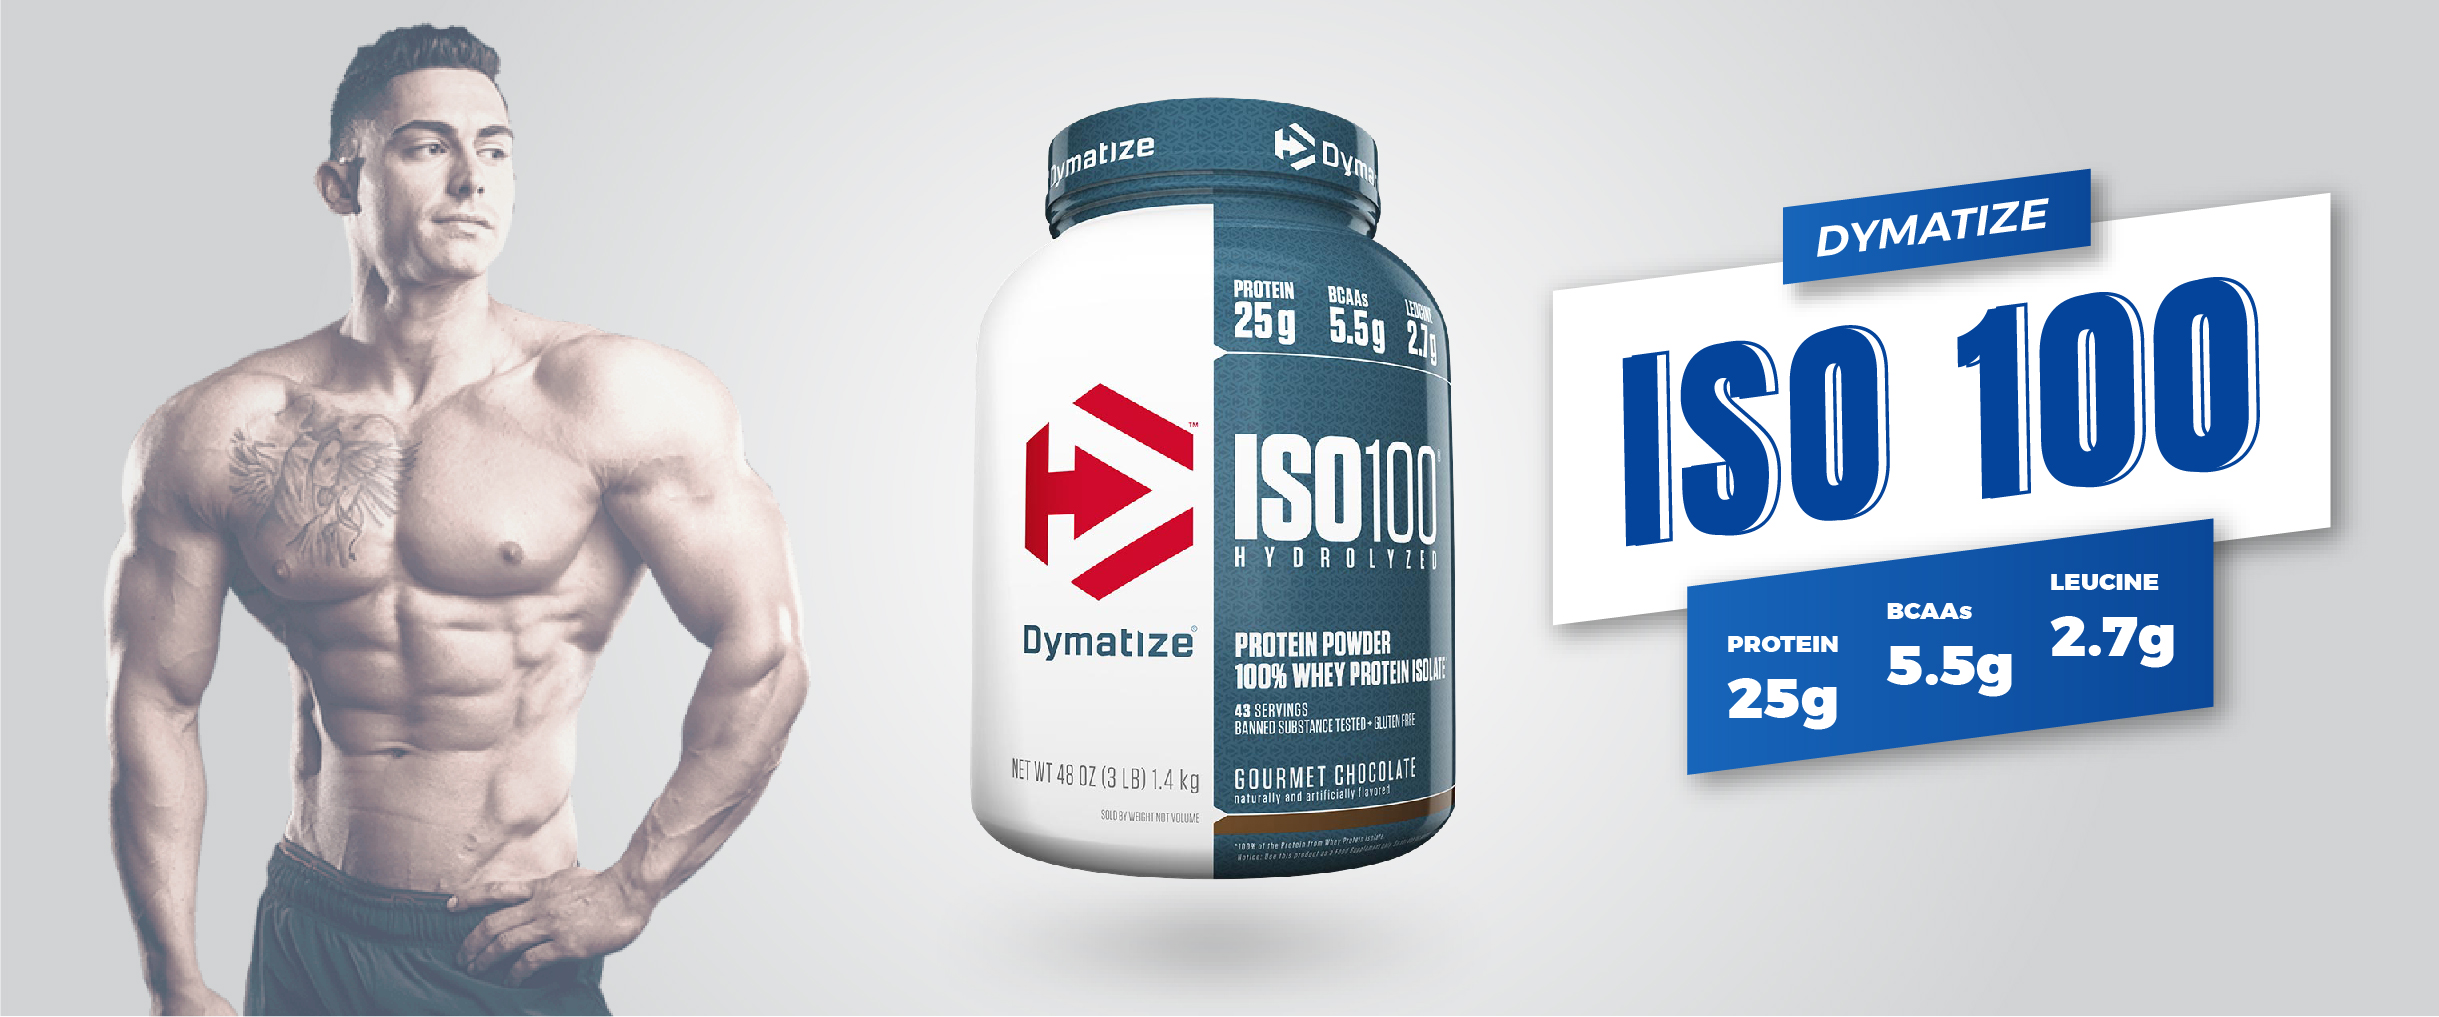 Dymatize-iso-1oo-whey-protein-phat-trien-co-bap-gymstore